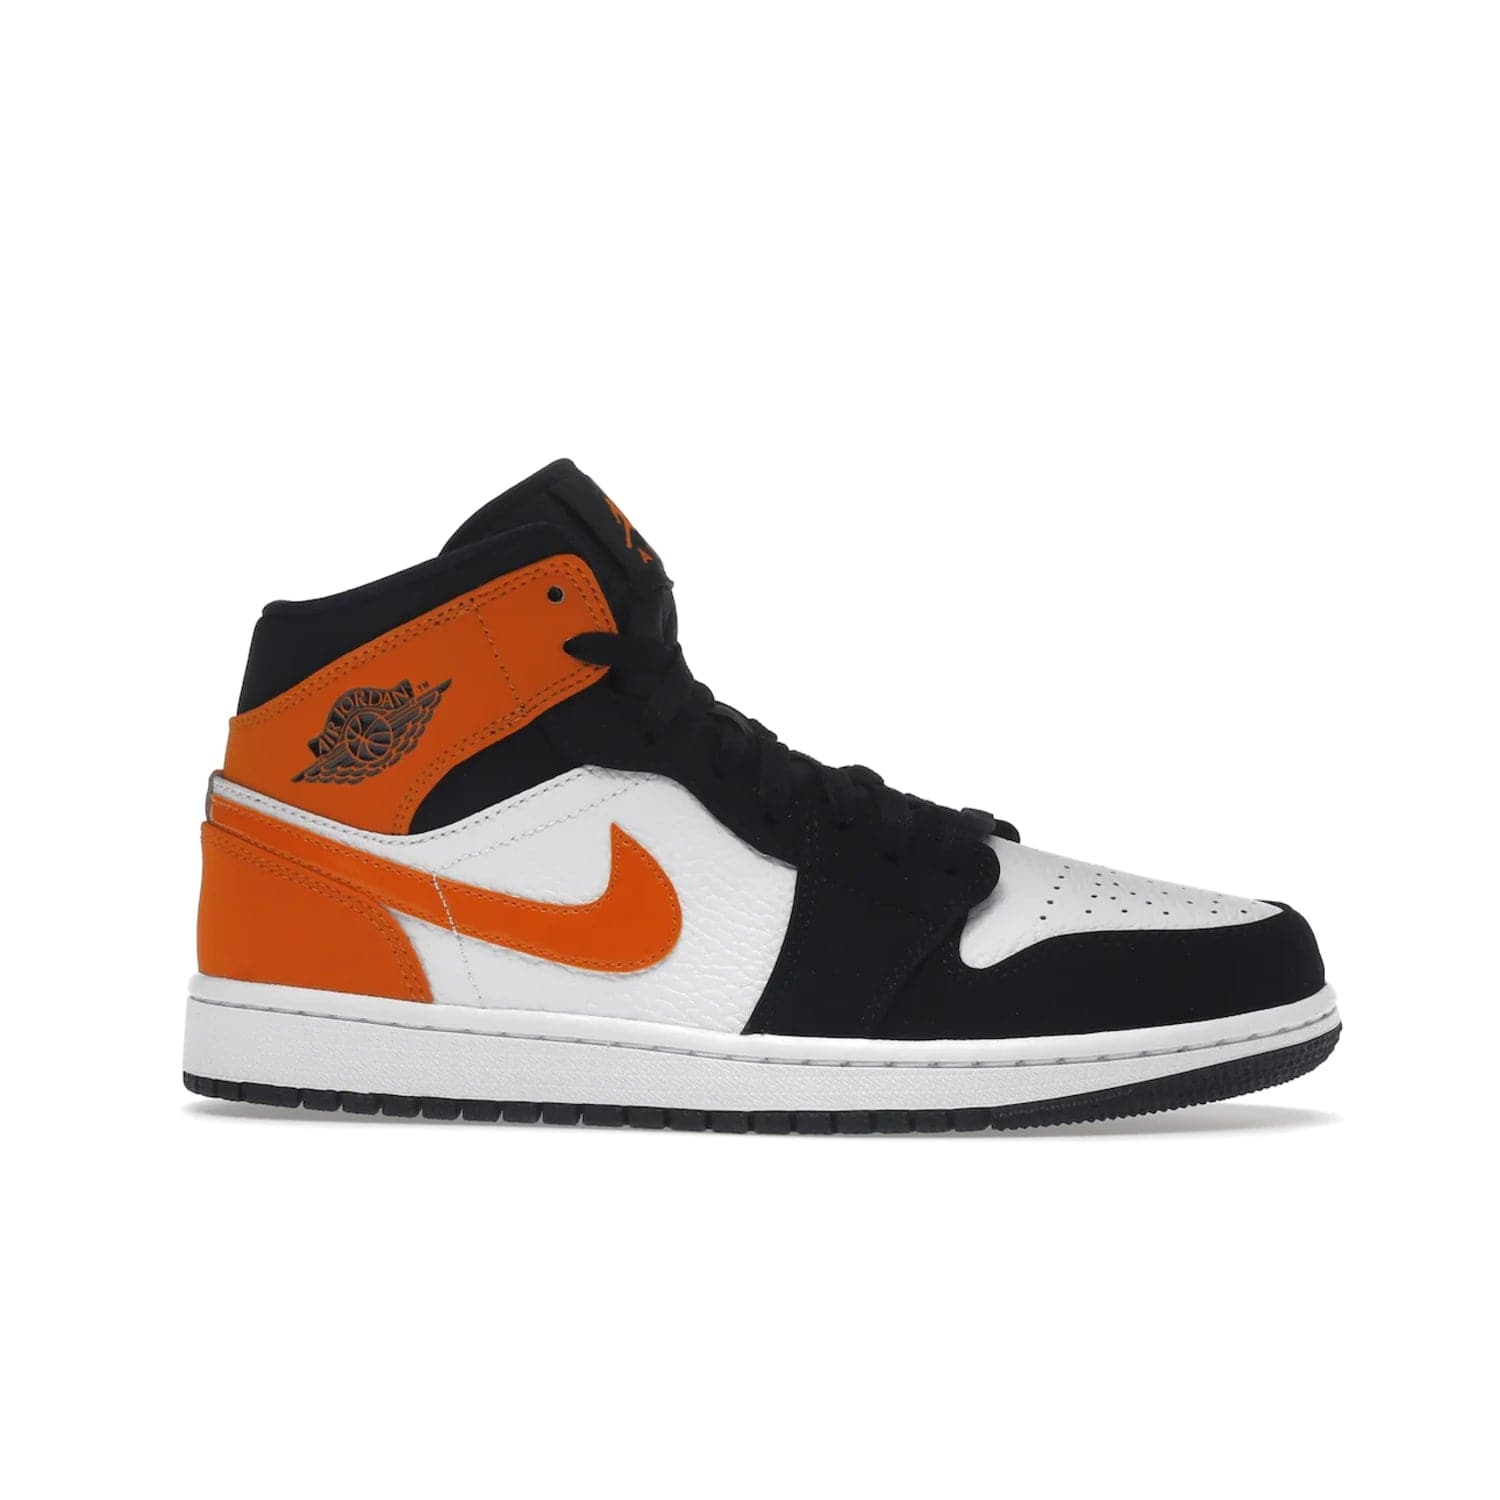 Jordan 1 Mid Shattered Backboard - Image 2 - Only at www.BallersClubKickz.com - The Air Jordan 1 Mid Shattered Backboard offers a timeless Black/White-Starfish colorway. Classic Swoosh logo and AJ insignia plus a shatterd backboard graphic on the insole. Get your pair today!